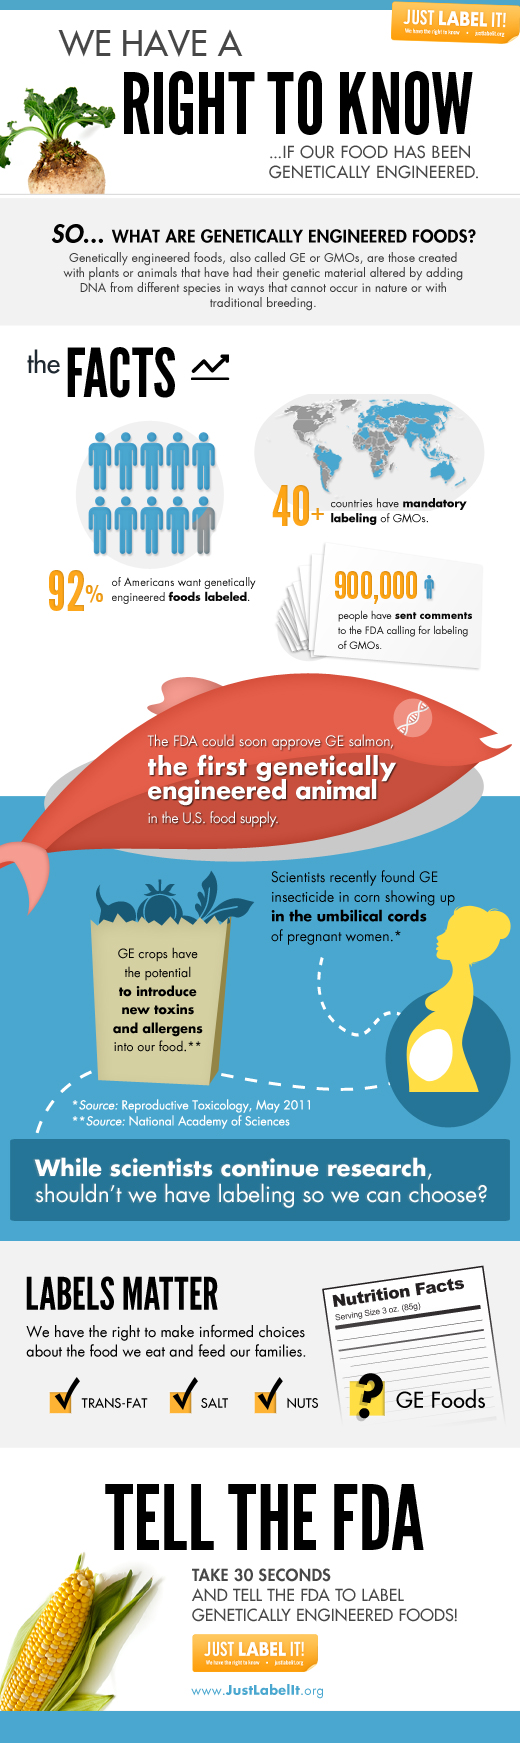 Just Label It Infographic- GE Foods at a Glance